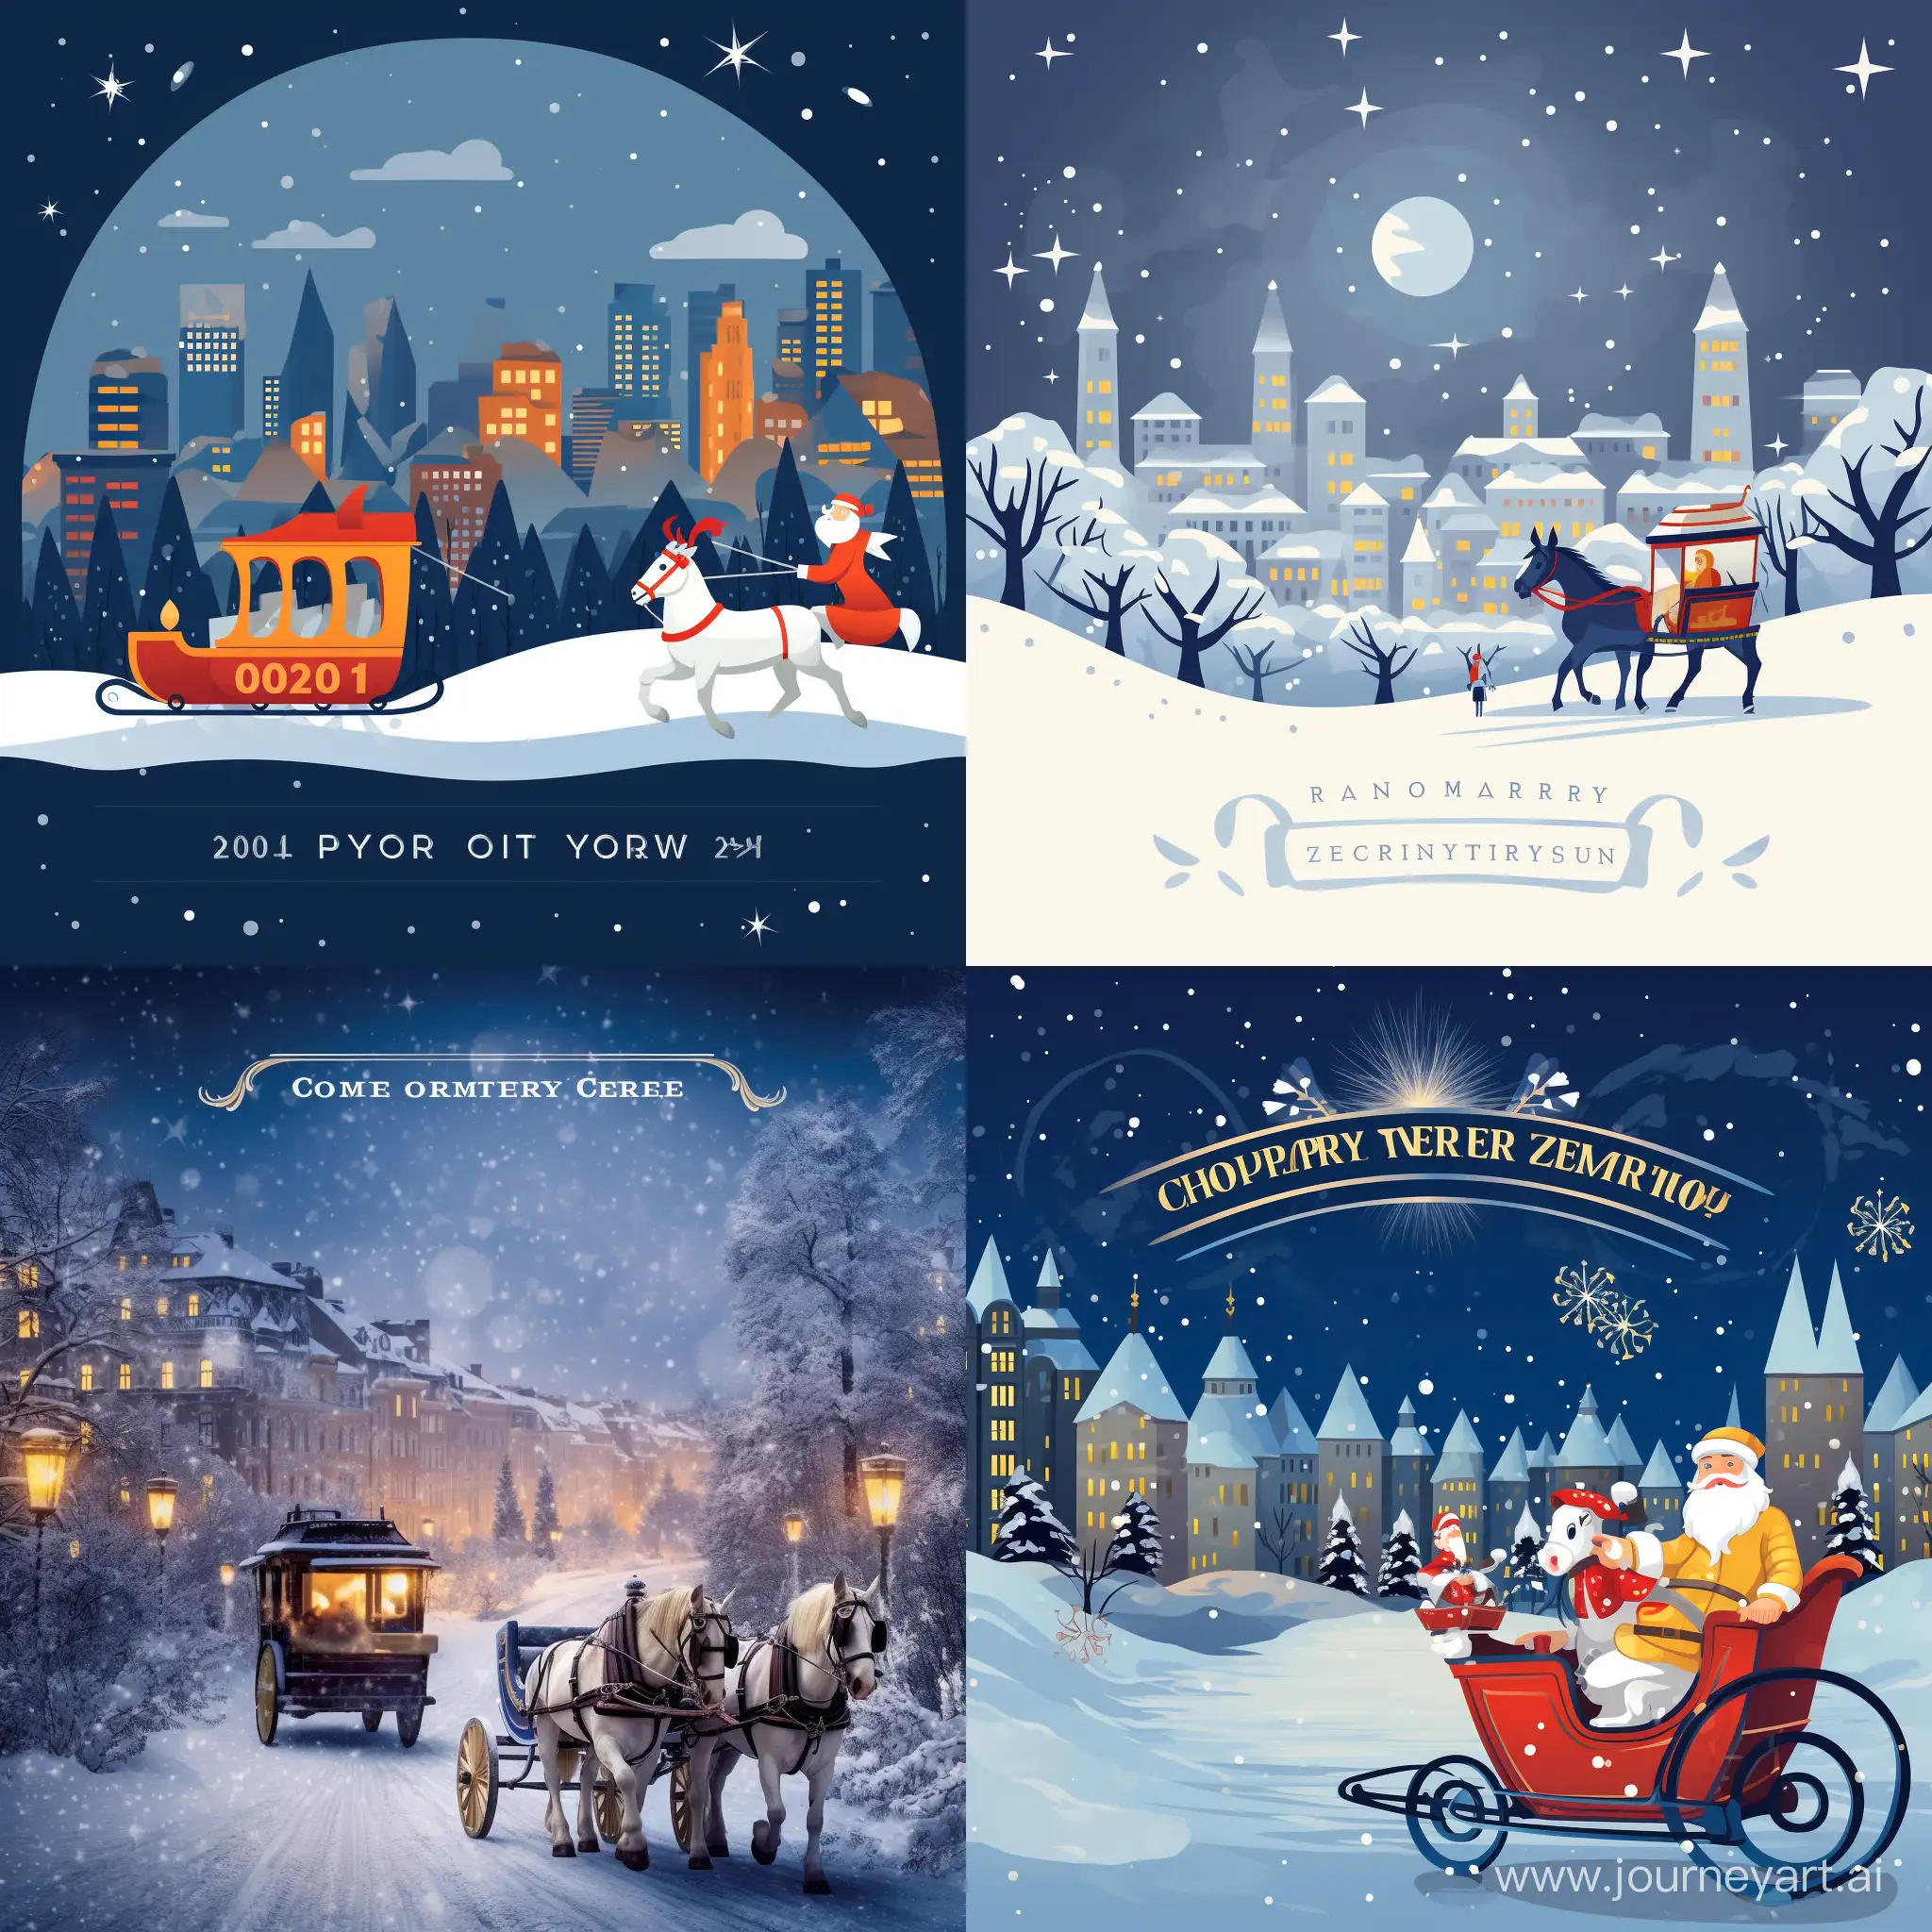 New-Years-Greeting-Card-Ded-Moroz-Riding-Towards-a-Festive-City-in-Snowfall